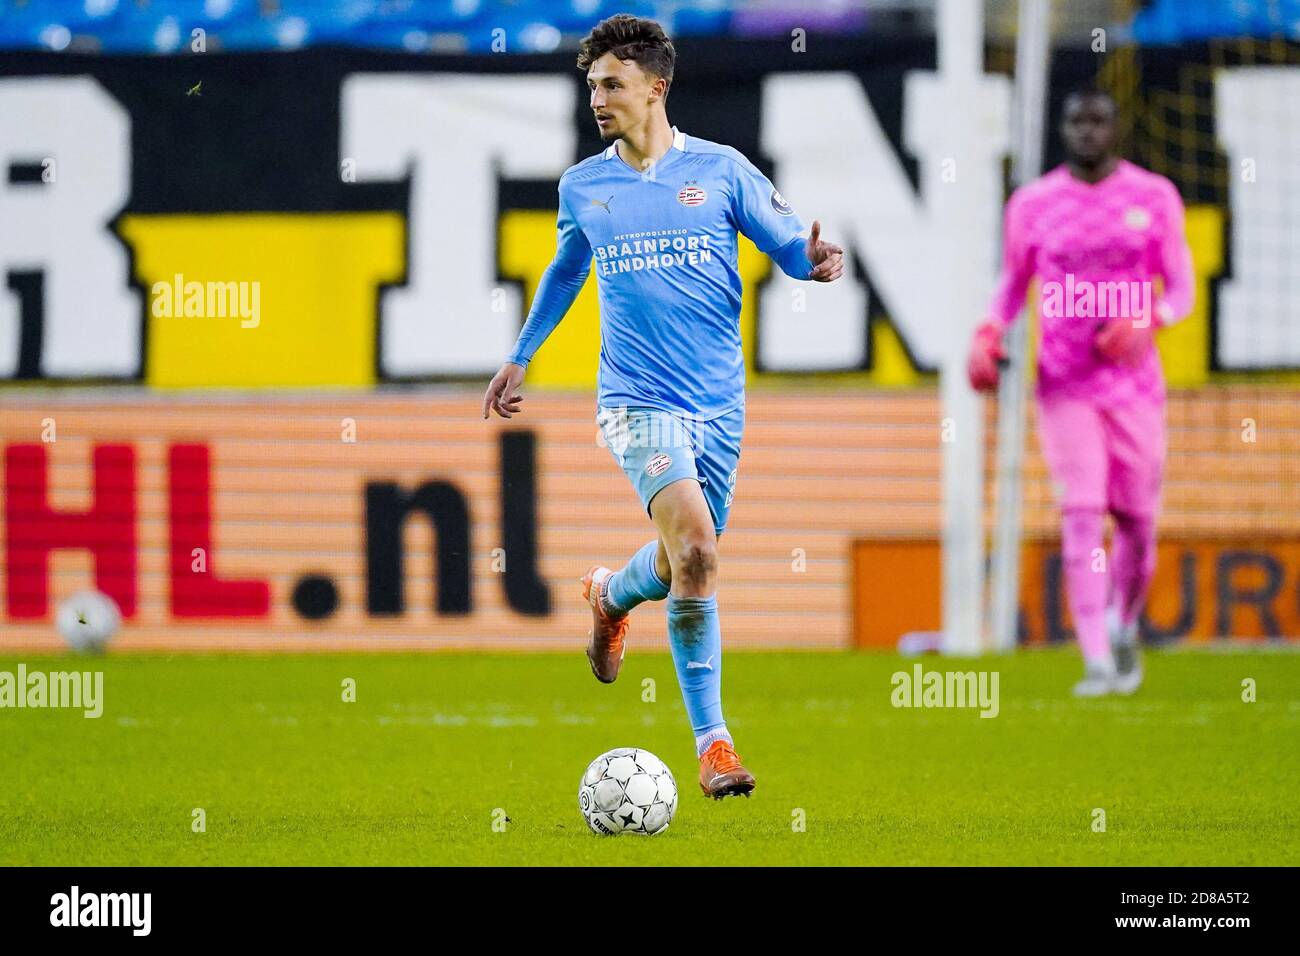 Olivier Boscagli of PSV during the Netherlands championship Eredivisie football match between Vitesse and PSV on October 25, 2020 at Gelredome Stadi C Stock Photo